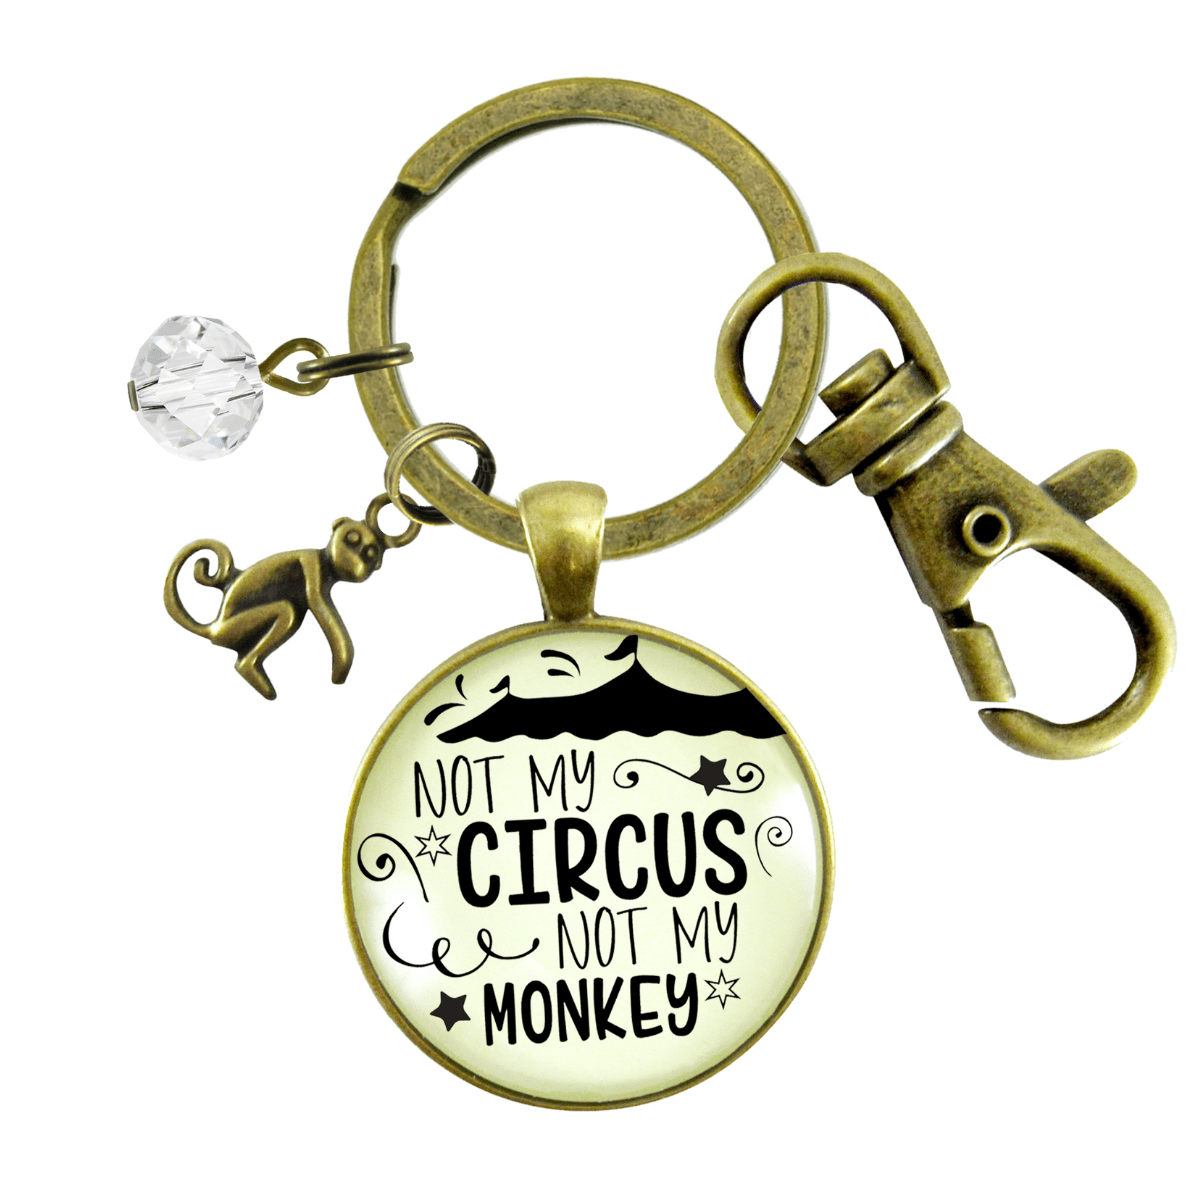 Not My Circus Not My Monkey Keychain Funny Positive Life Attitude Jewelry Mom Quote - Gutsy Goodness